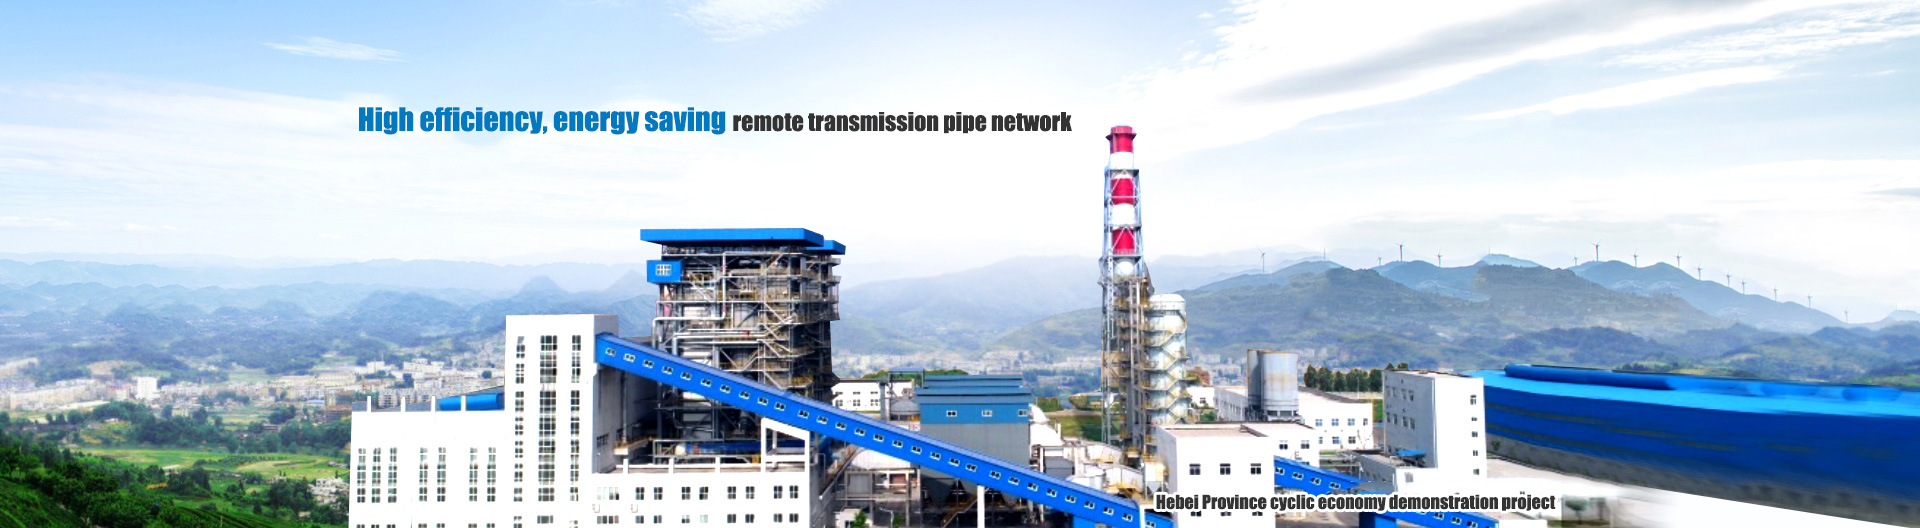 Transmission pipe network